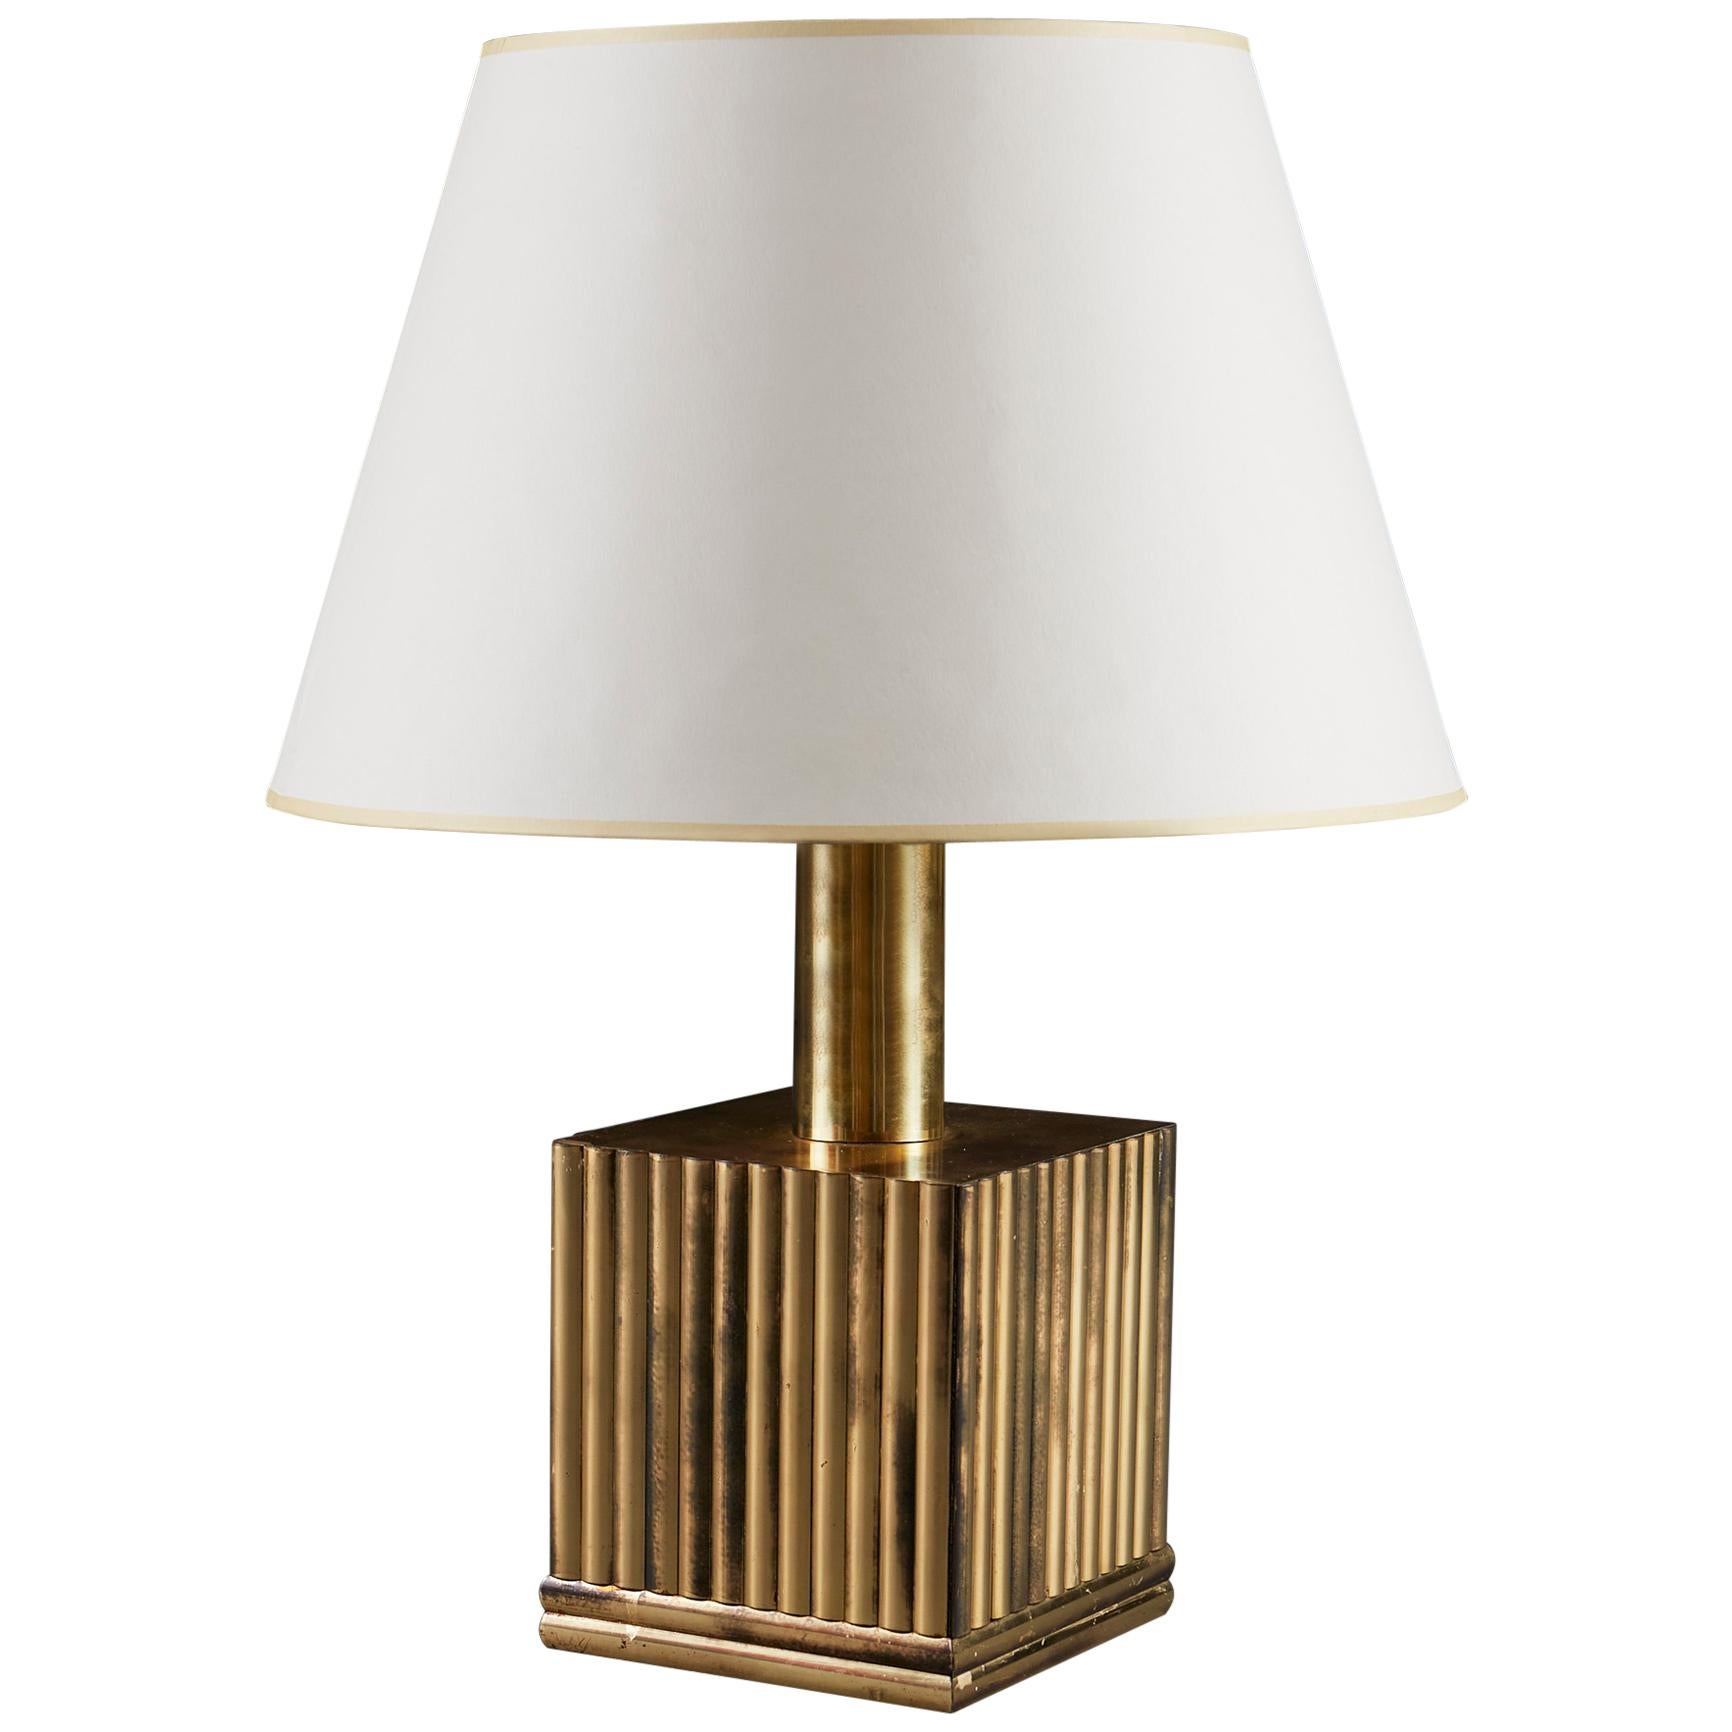 1960s Fluted Brass Cube Table Lamp Attributed to Romeo Rega